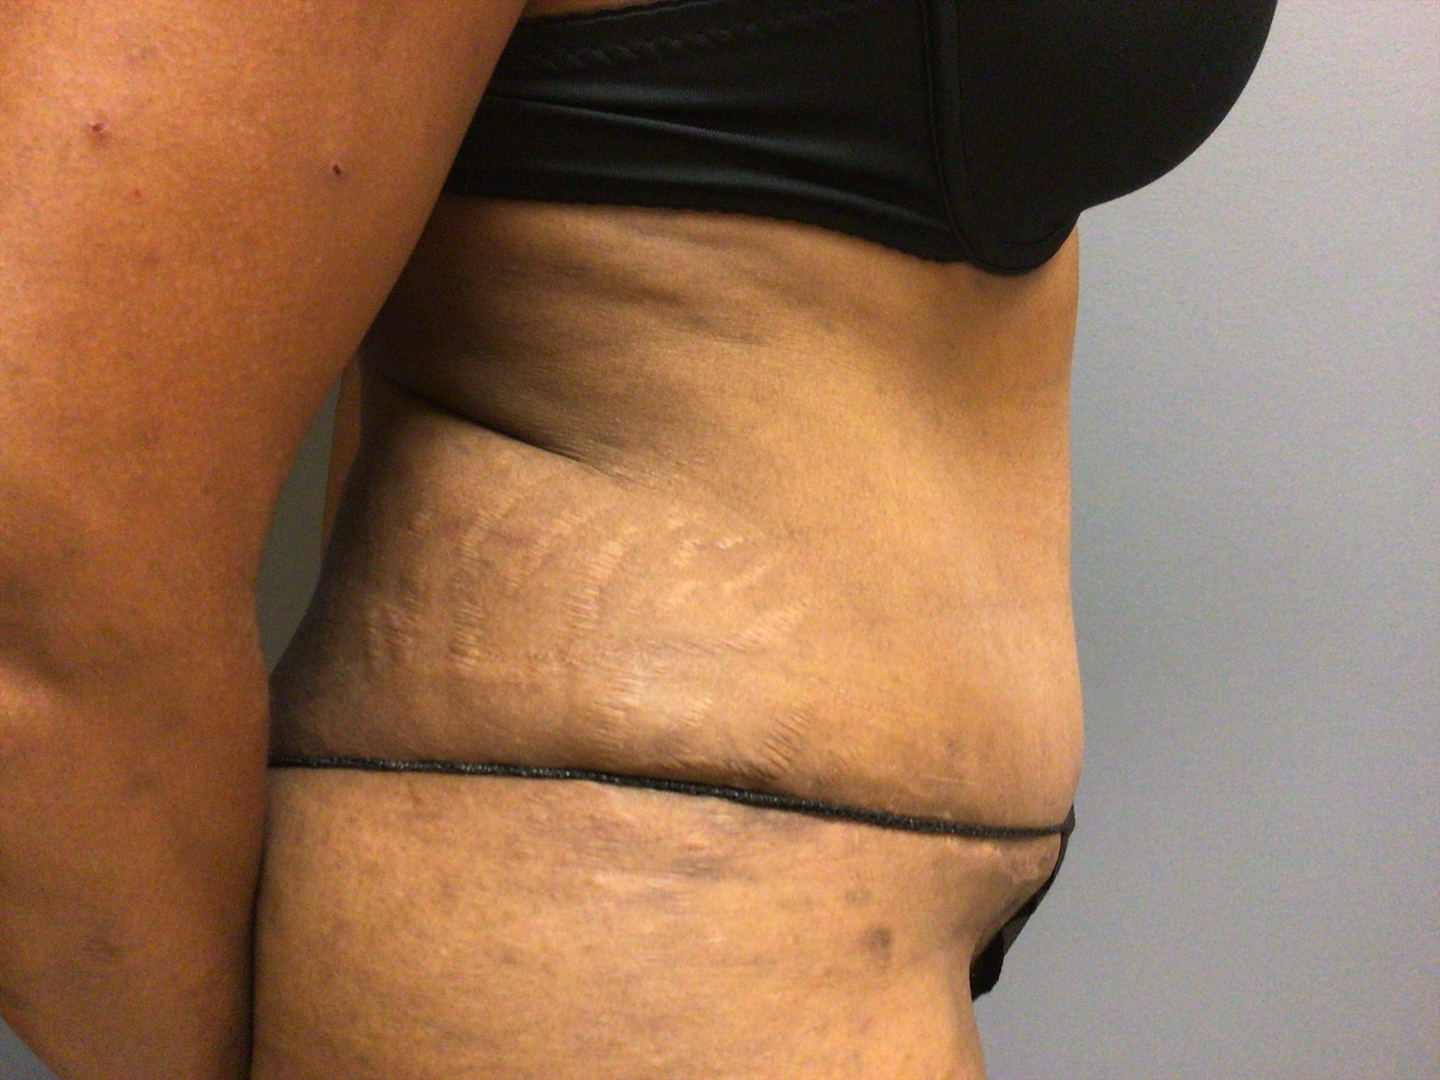 53 year old female right side 3 months post op tummy tuck